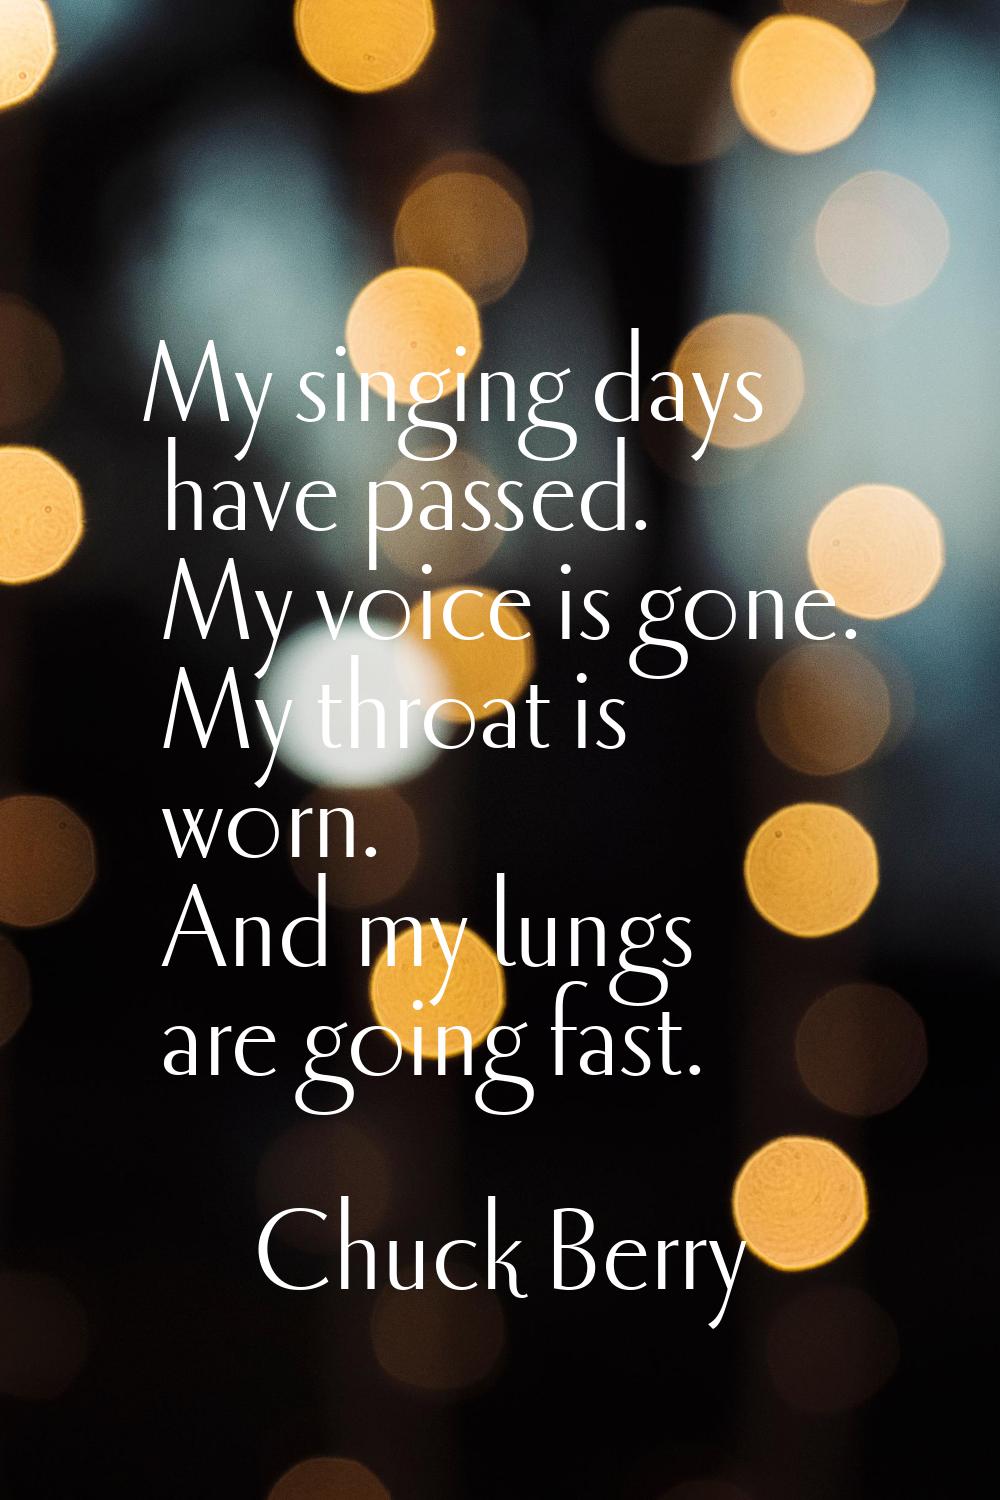 My singing days have passed. My voice is gone. My throat is worn. And my lungs are going fast.